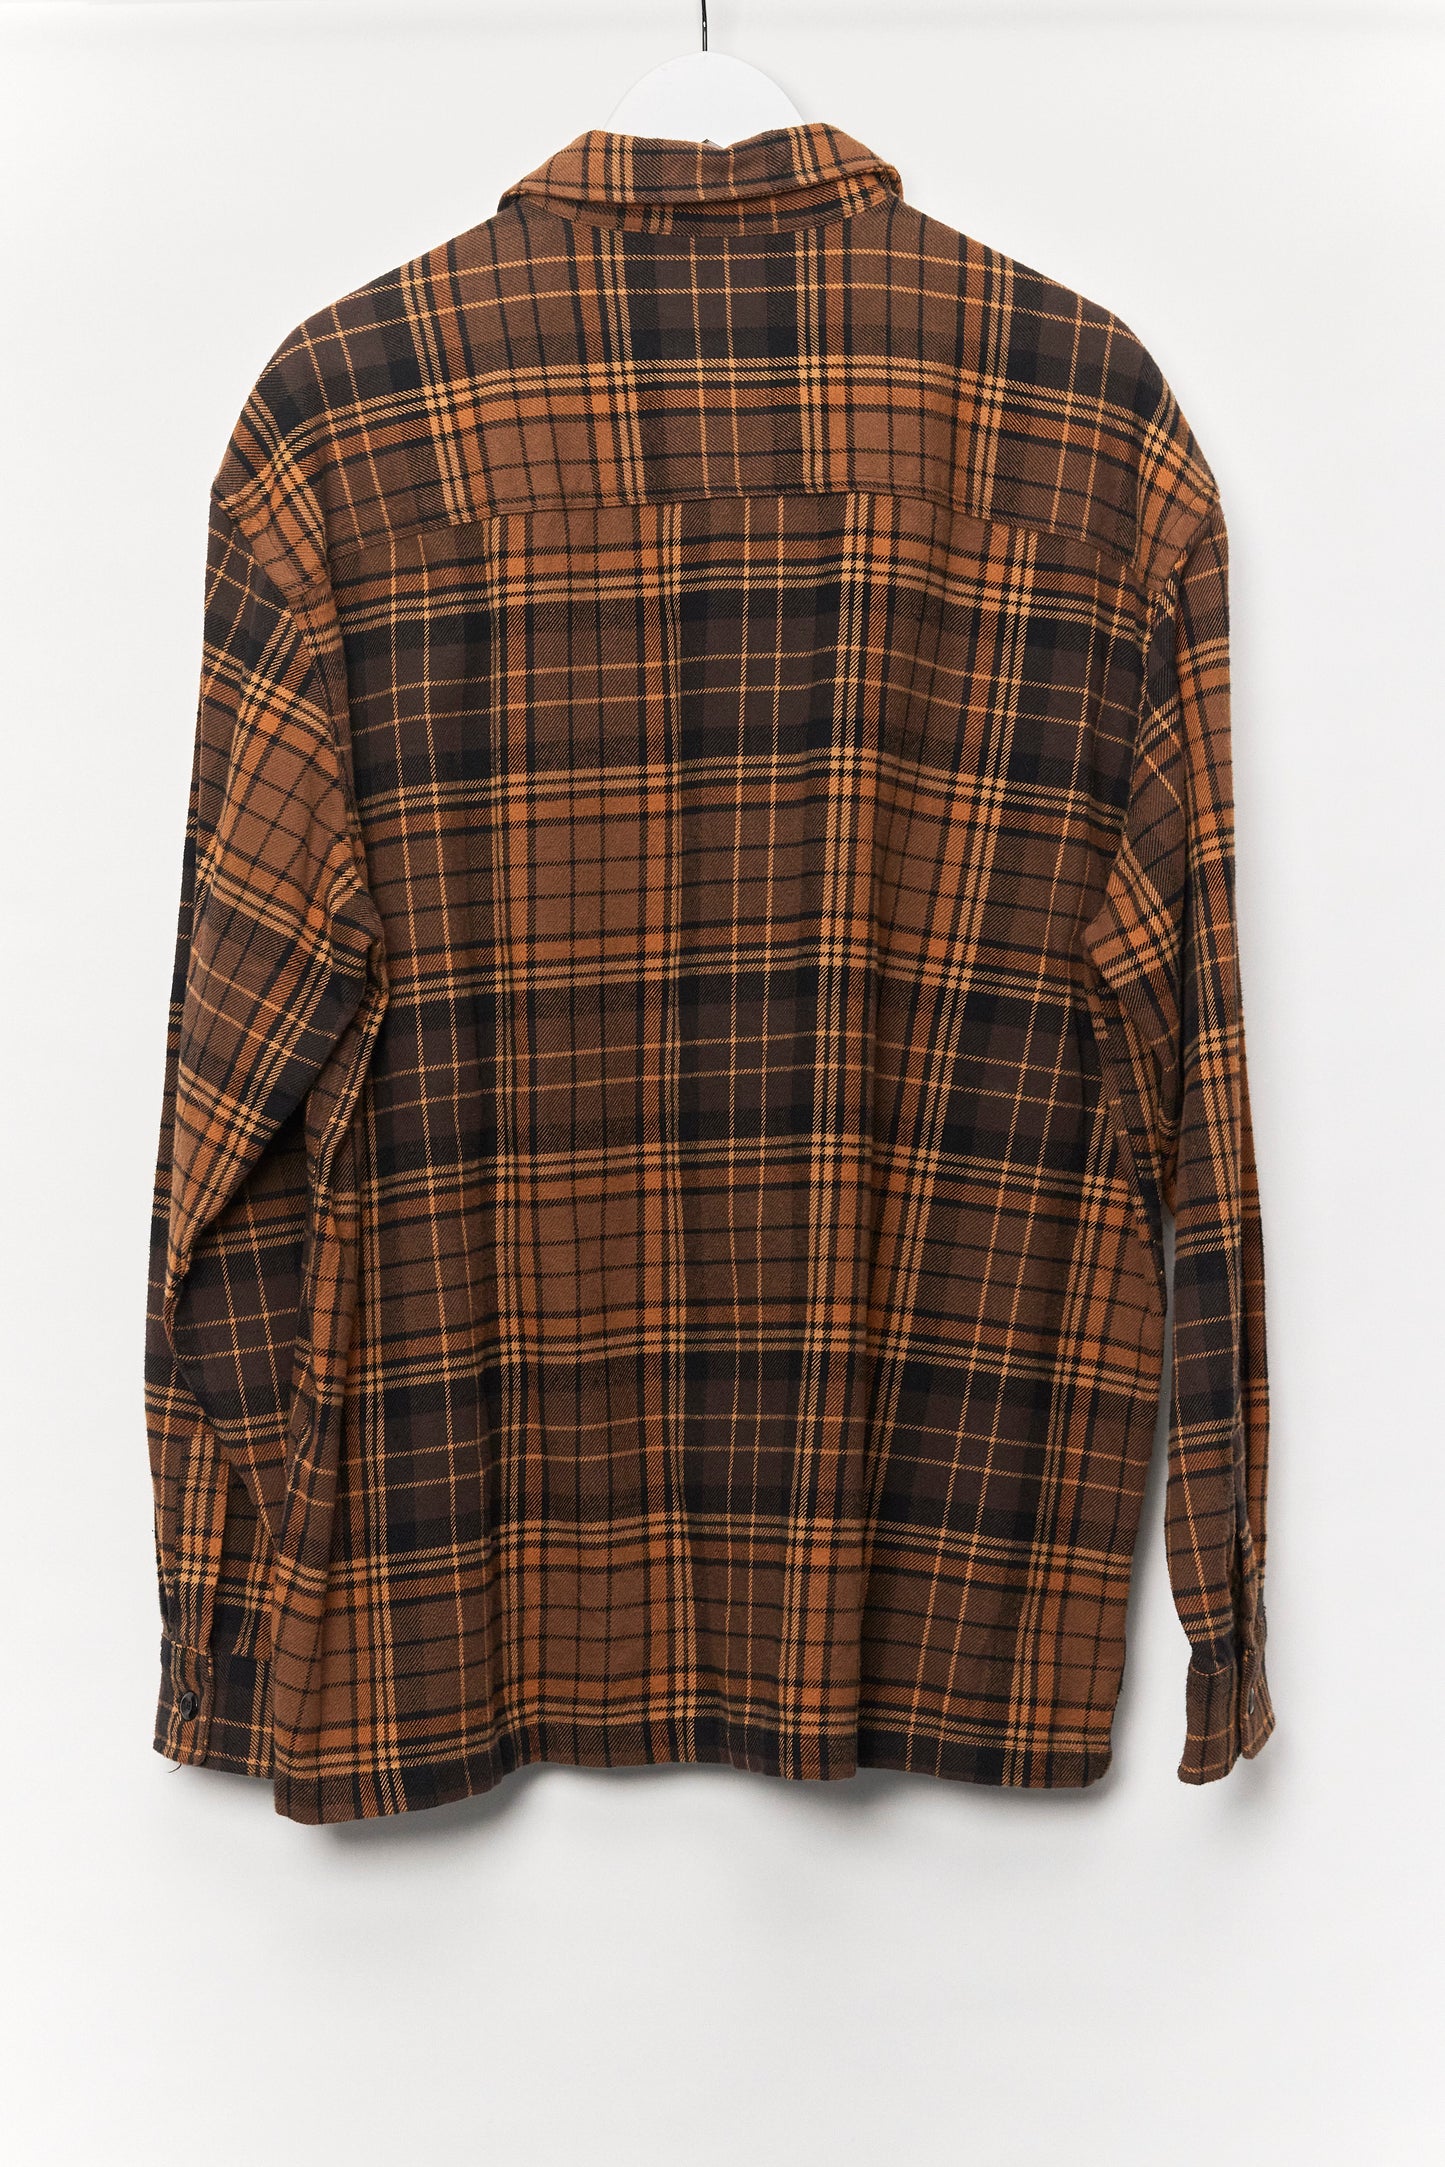 Mens H&M Brown Check Over shirt size Large